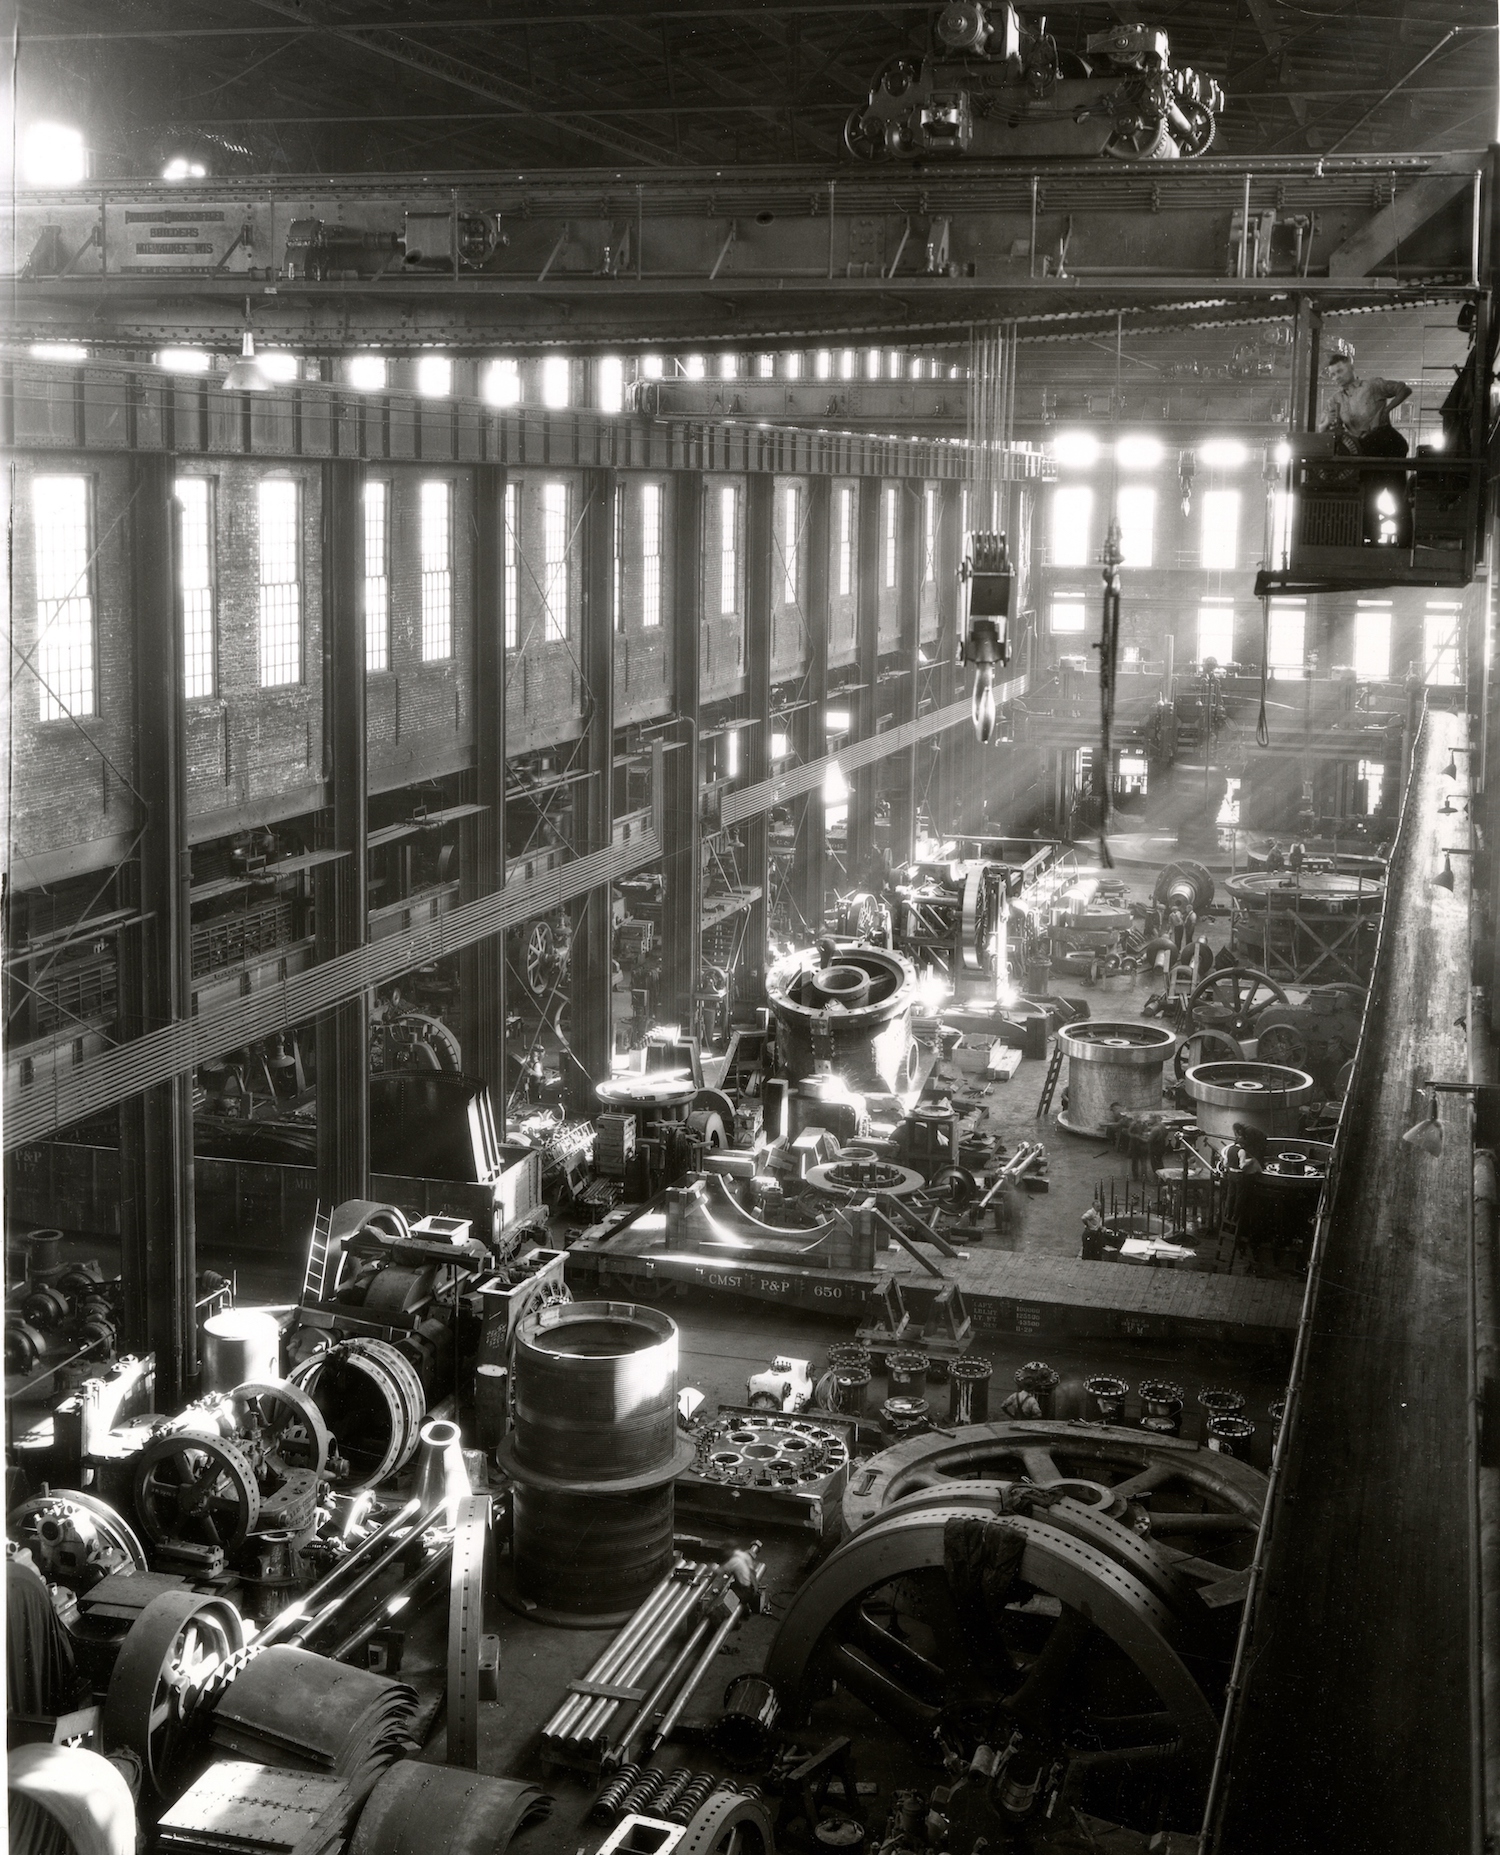 Photograph of an Allis-Chalmers work bay taken in 1930.